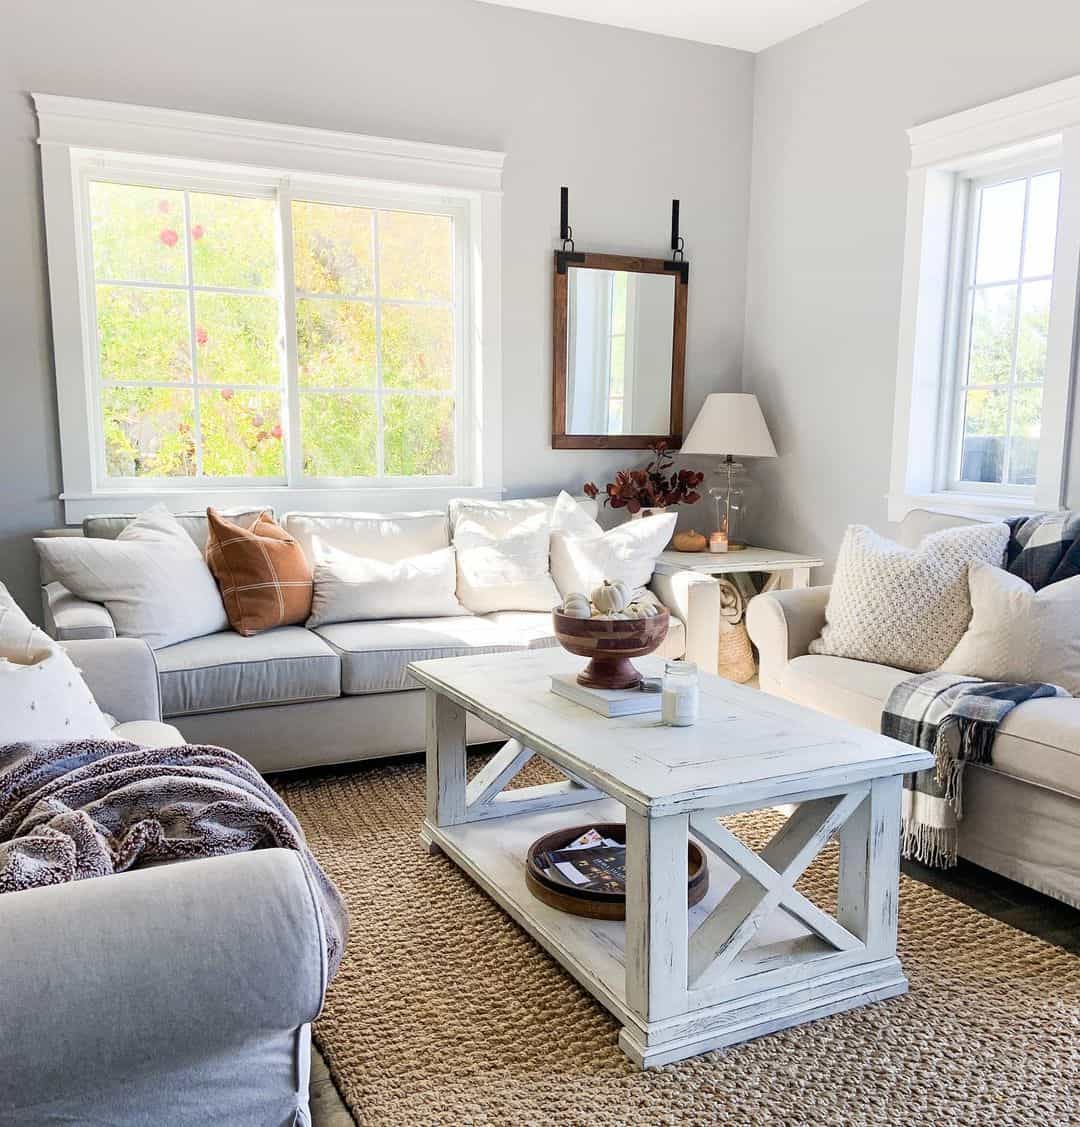 35 Window Trim Ideas to Revitalize Your Space